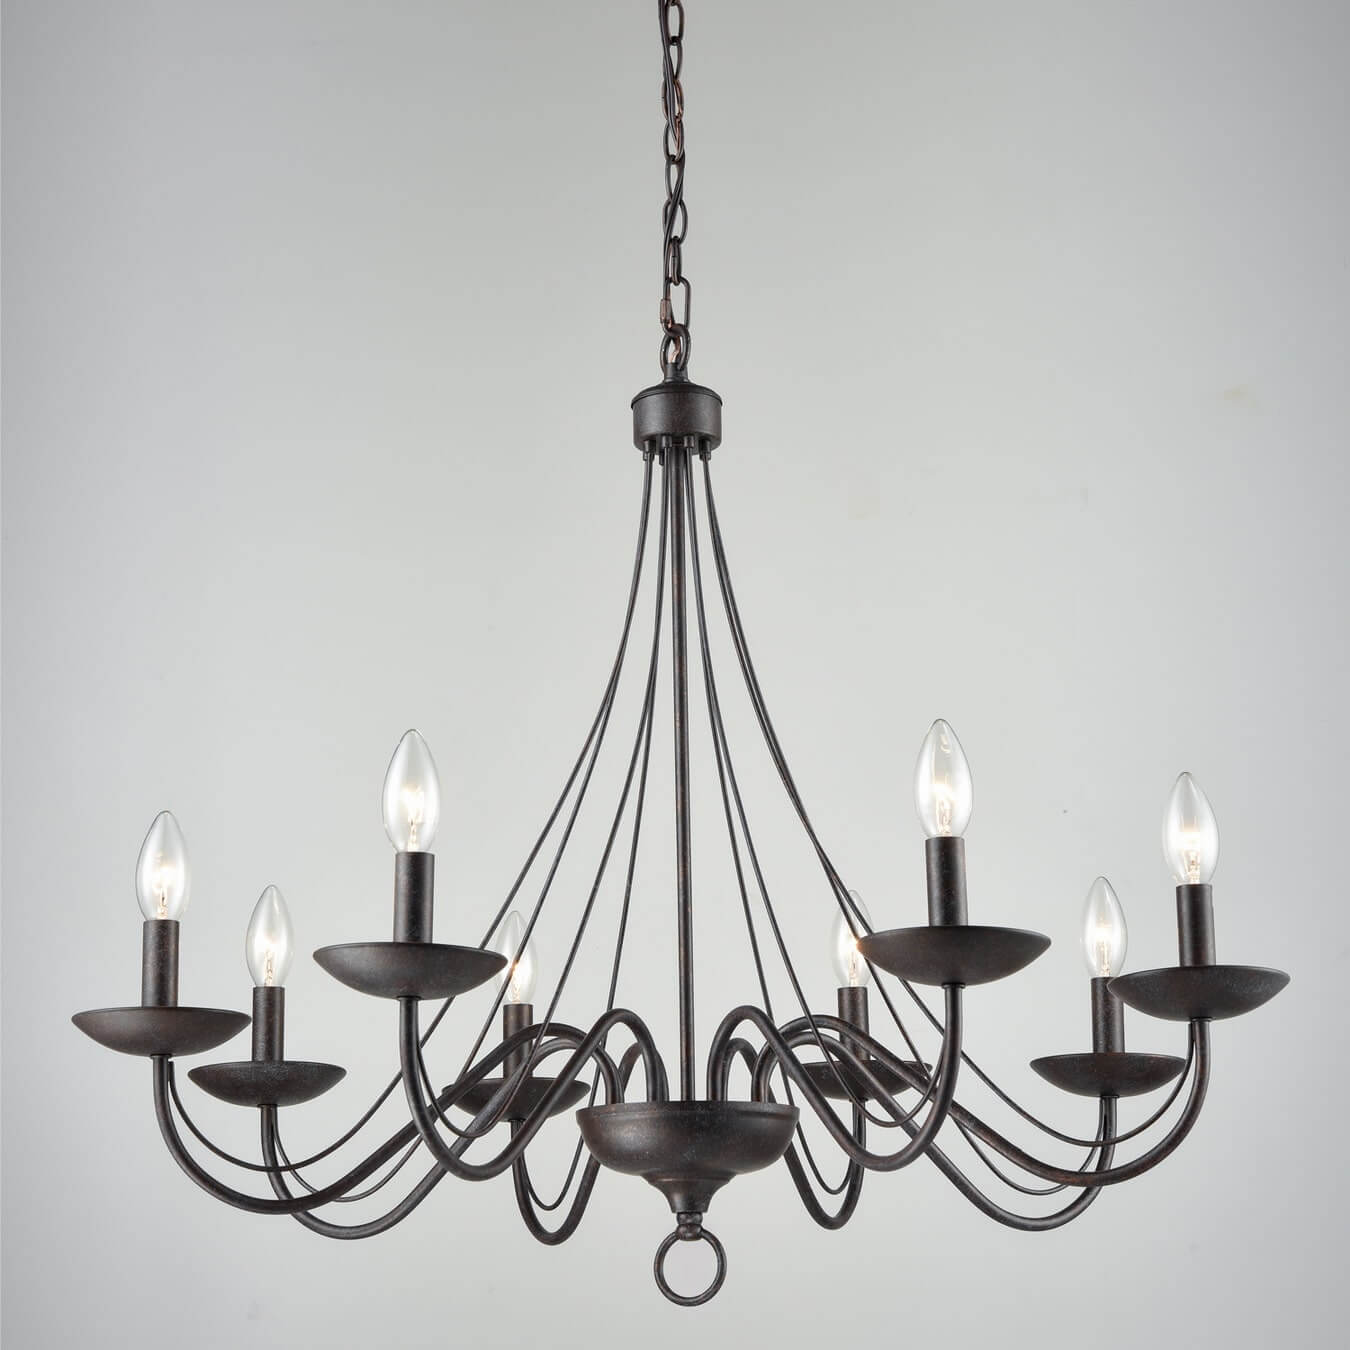 8-Light Rustic Candle Chandelier Wrought Iron Chandeliers